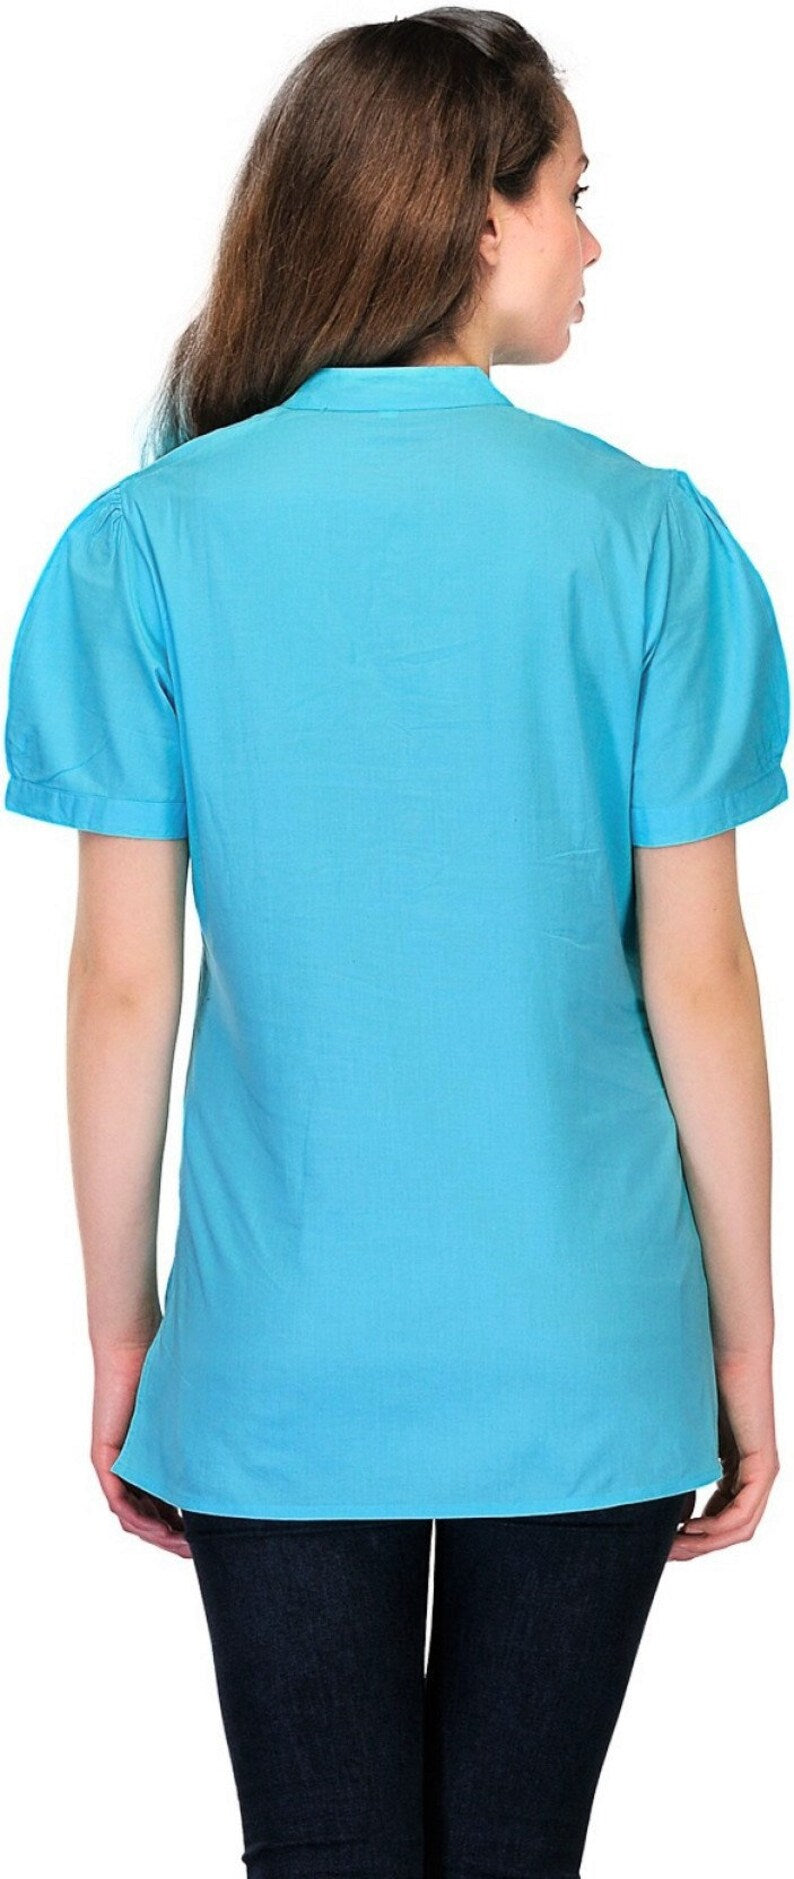 Blue Cotton Summer Tops For Women  , FREE  DELIVERY